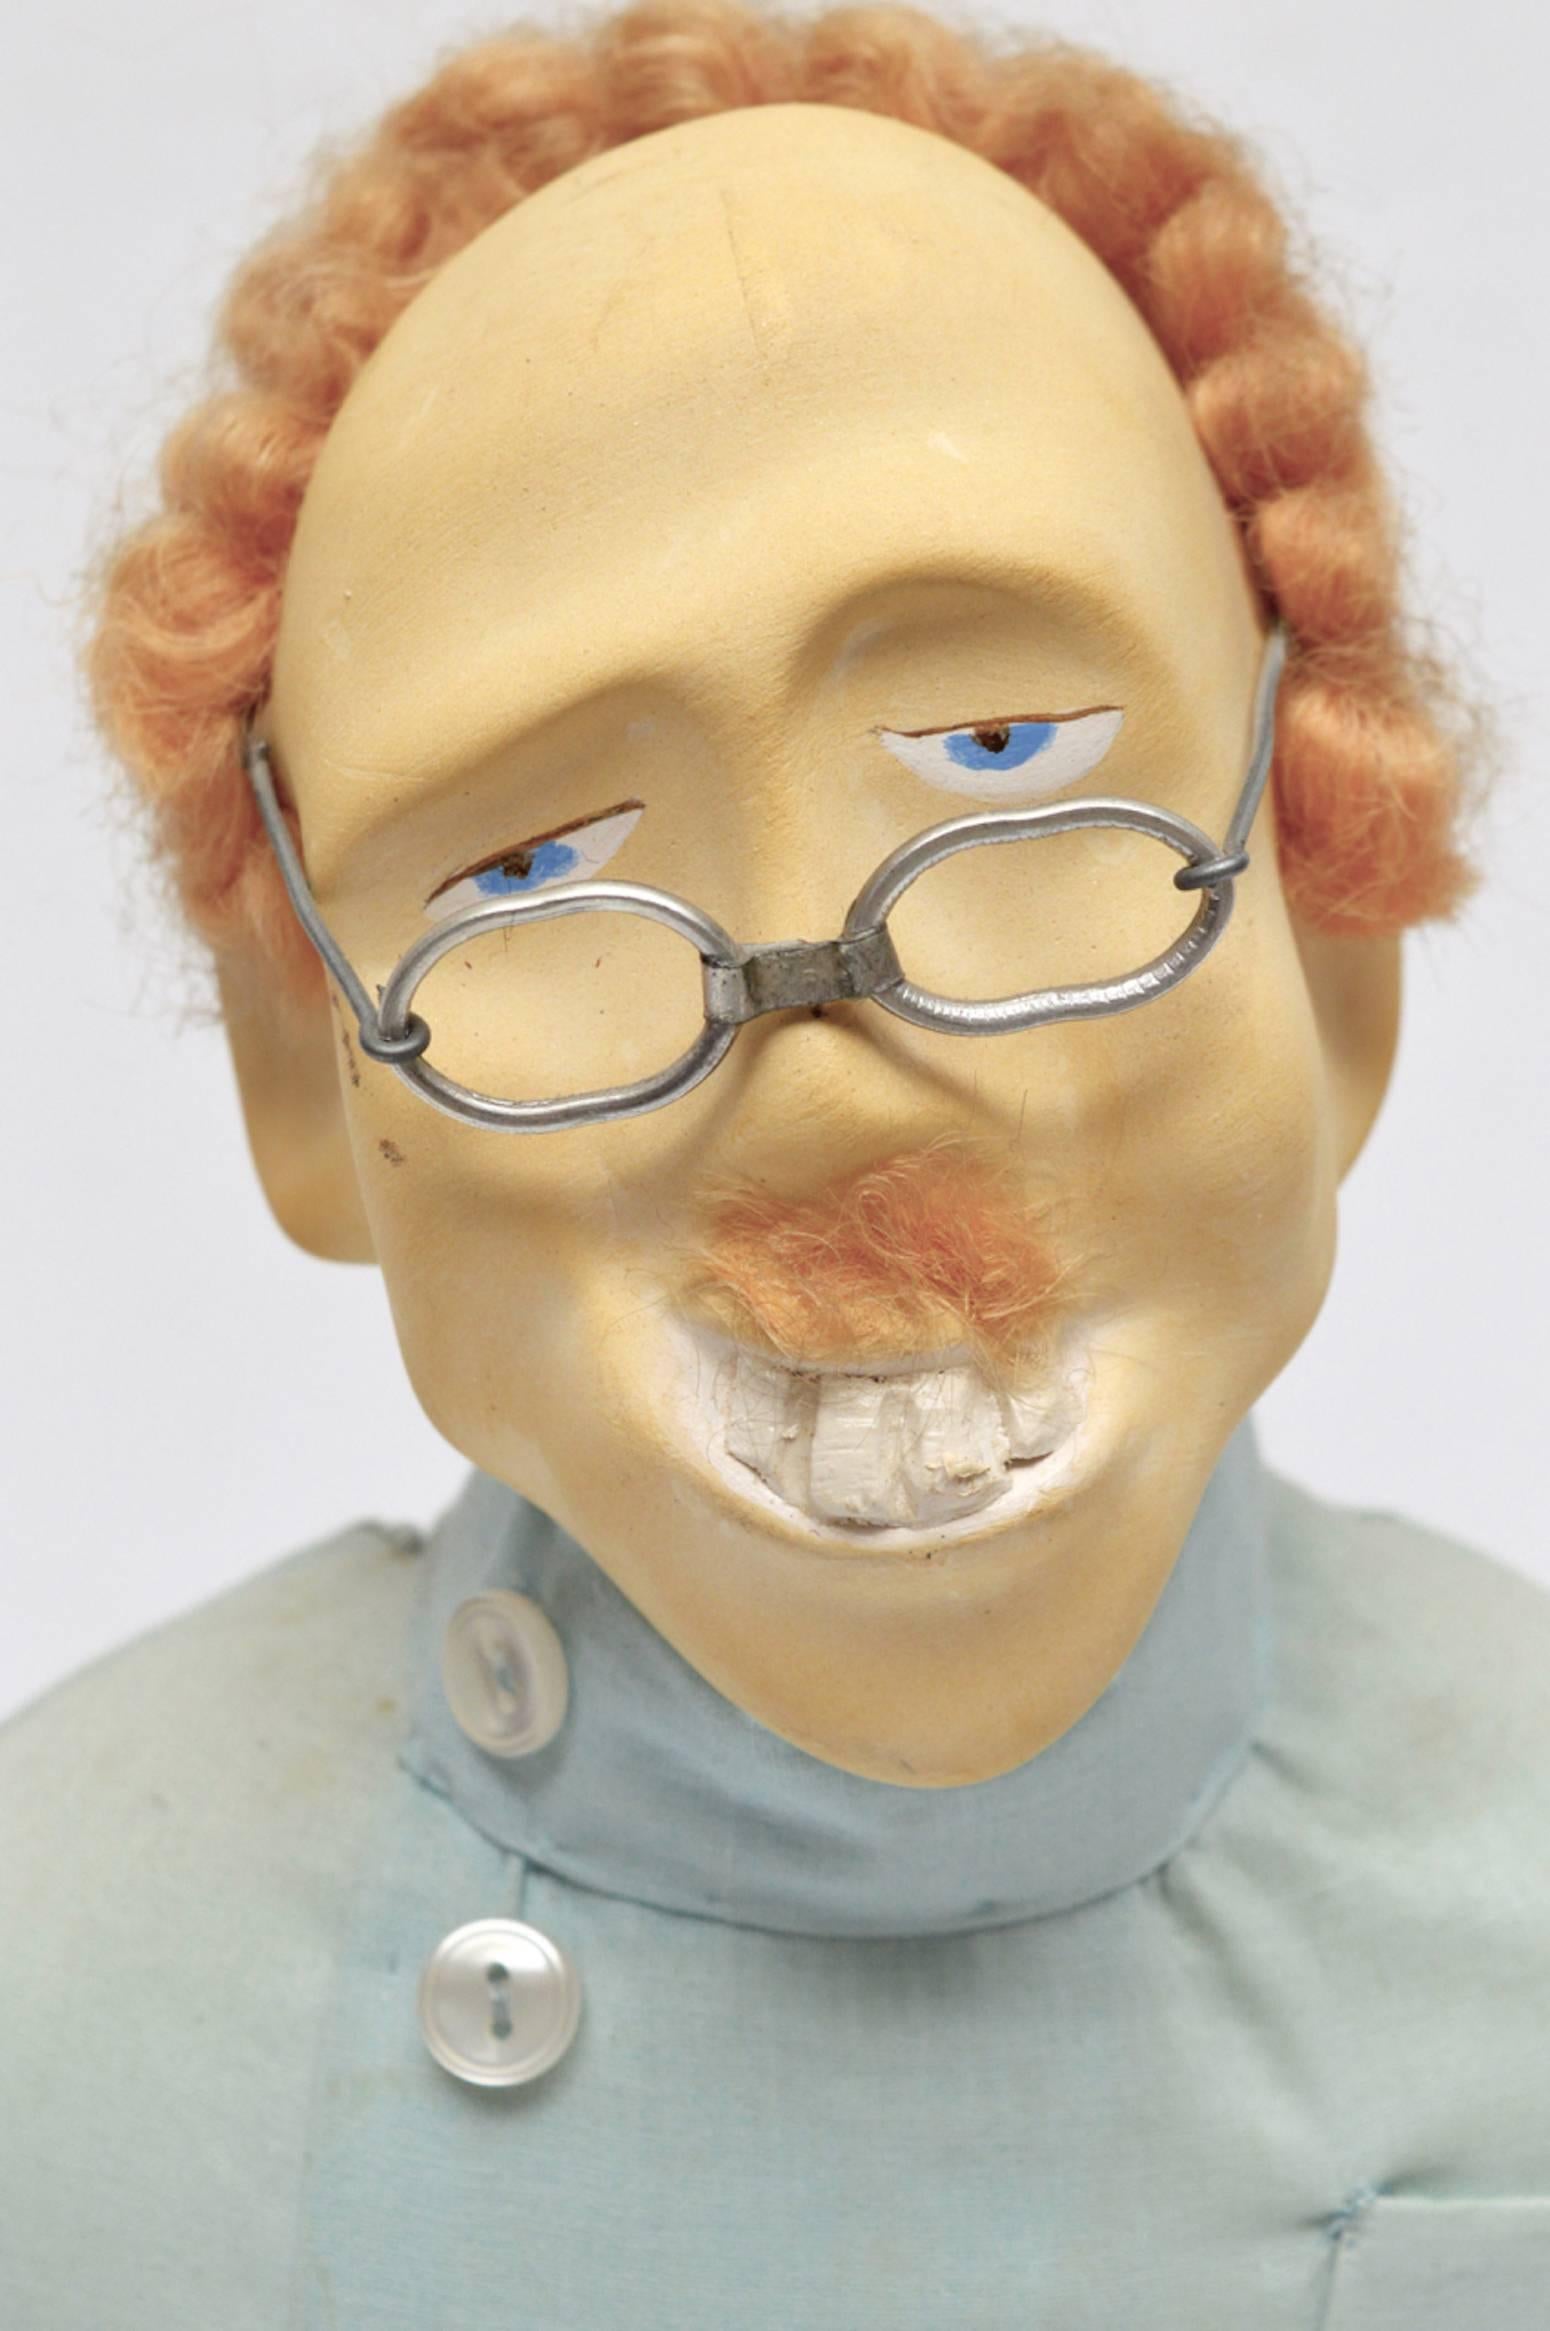 This is such a strange and wonderful item! The head is made from a plaster and plastic composition material used for model making in the 1930s and 1940s.The body is soft filled textile and is connected a turned wood stand.
A great item for a